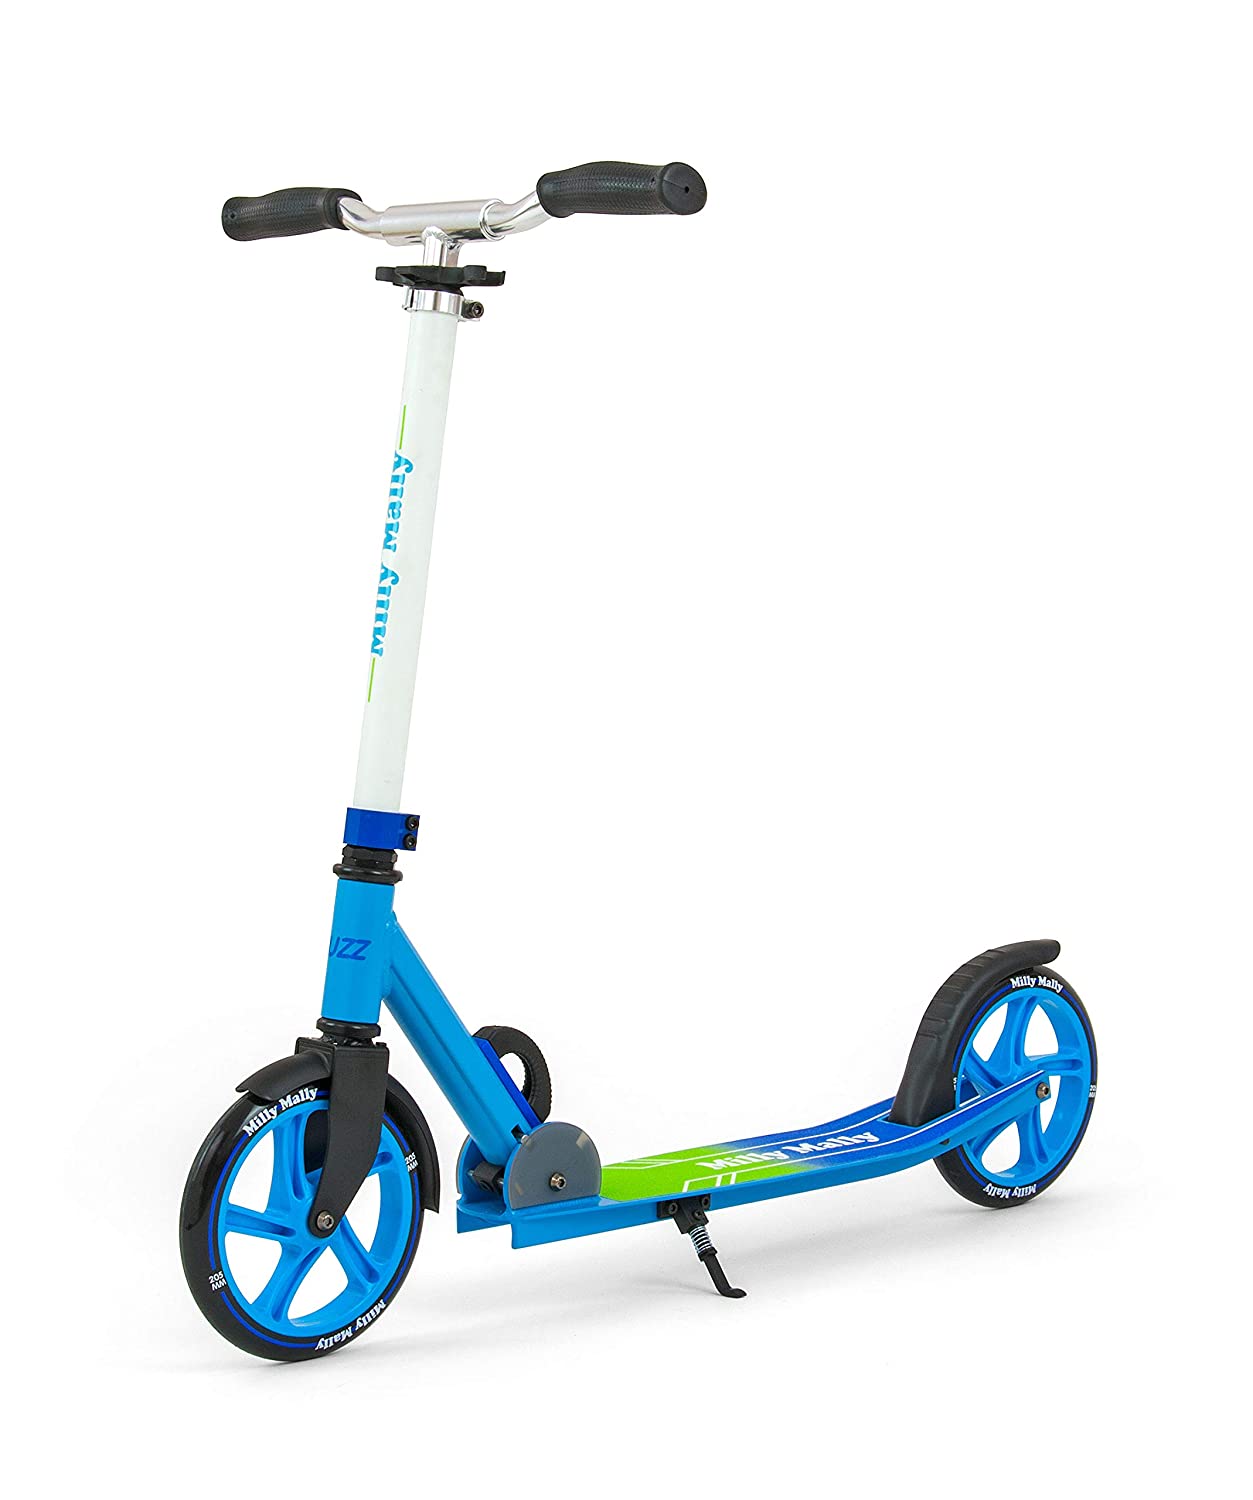 Milly Mally Buzz folding scooter with two wheels.